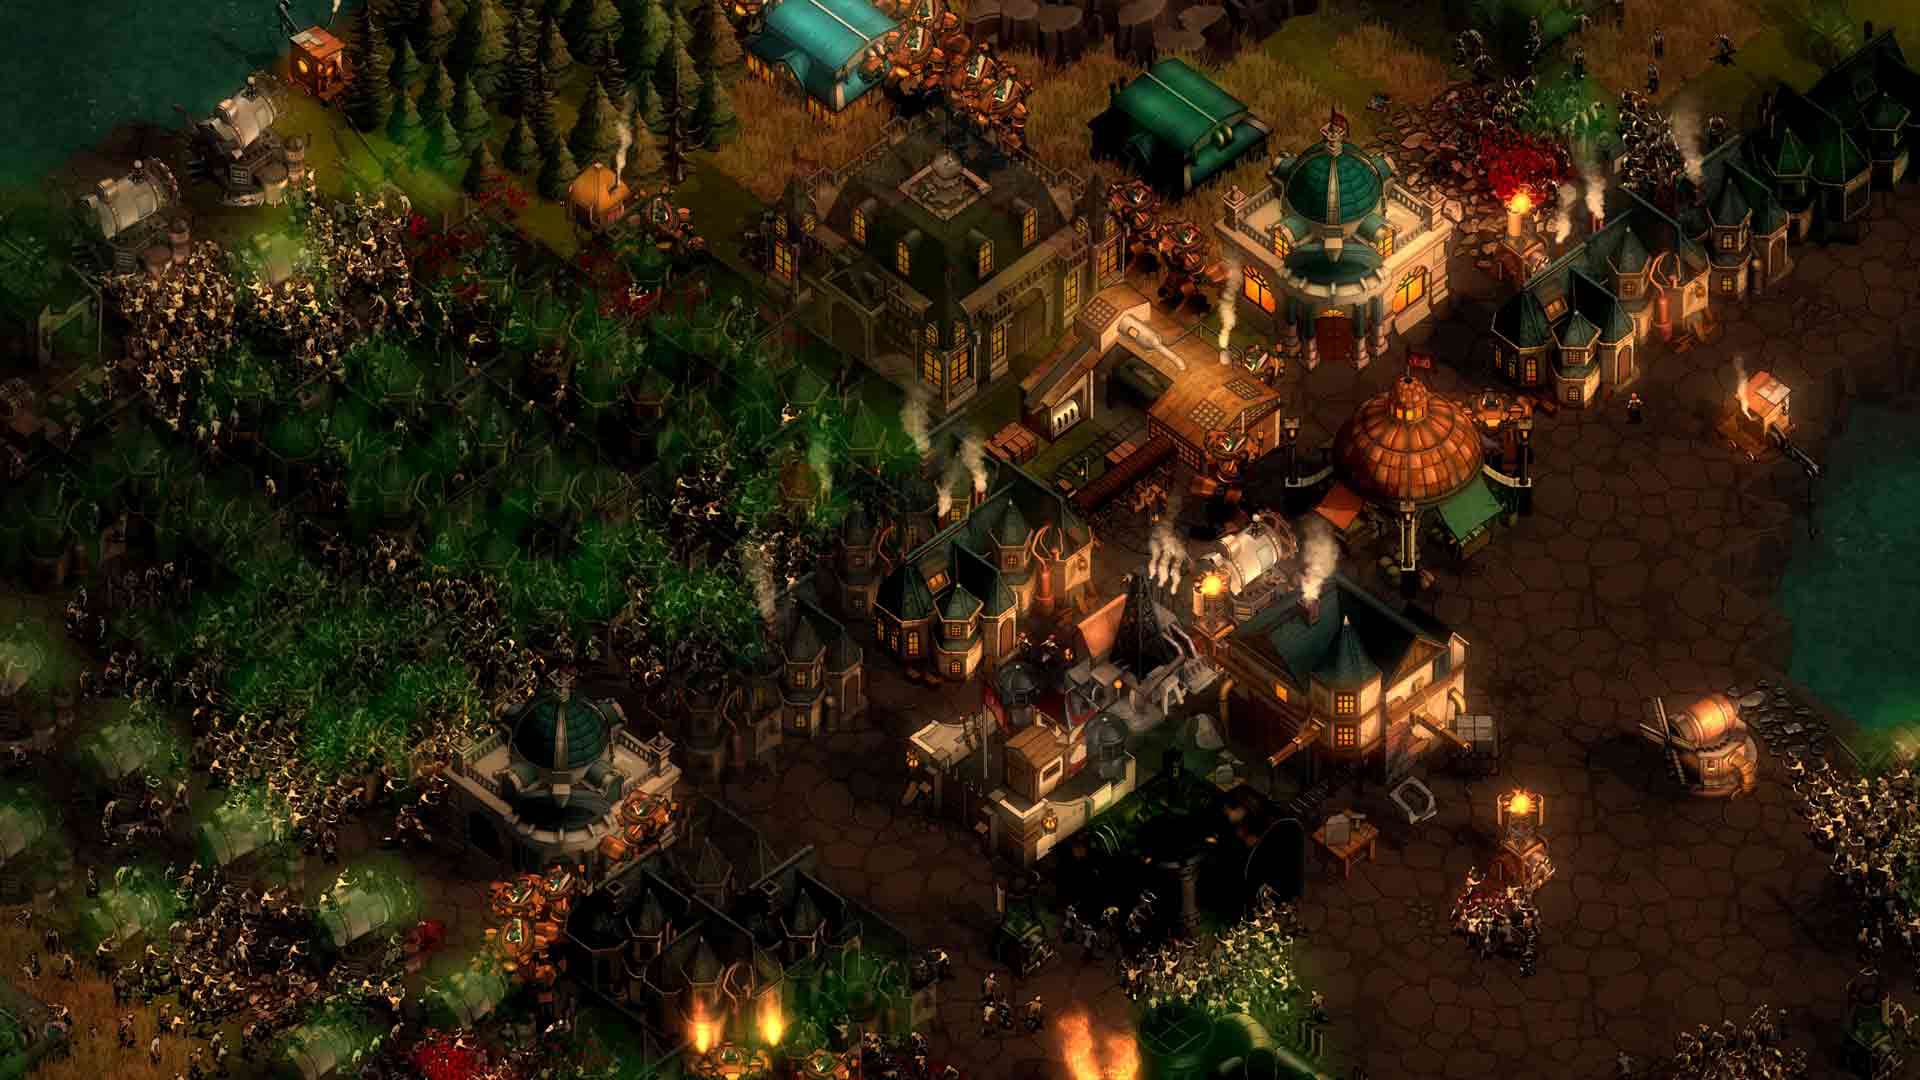 A town in They Are Billions is overrun by infected encroaching from the bottom-left.